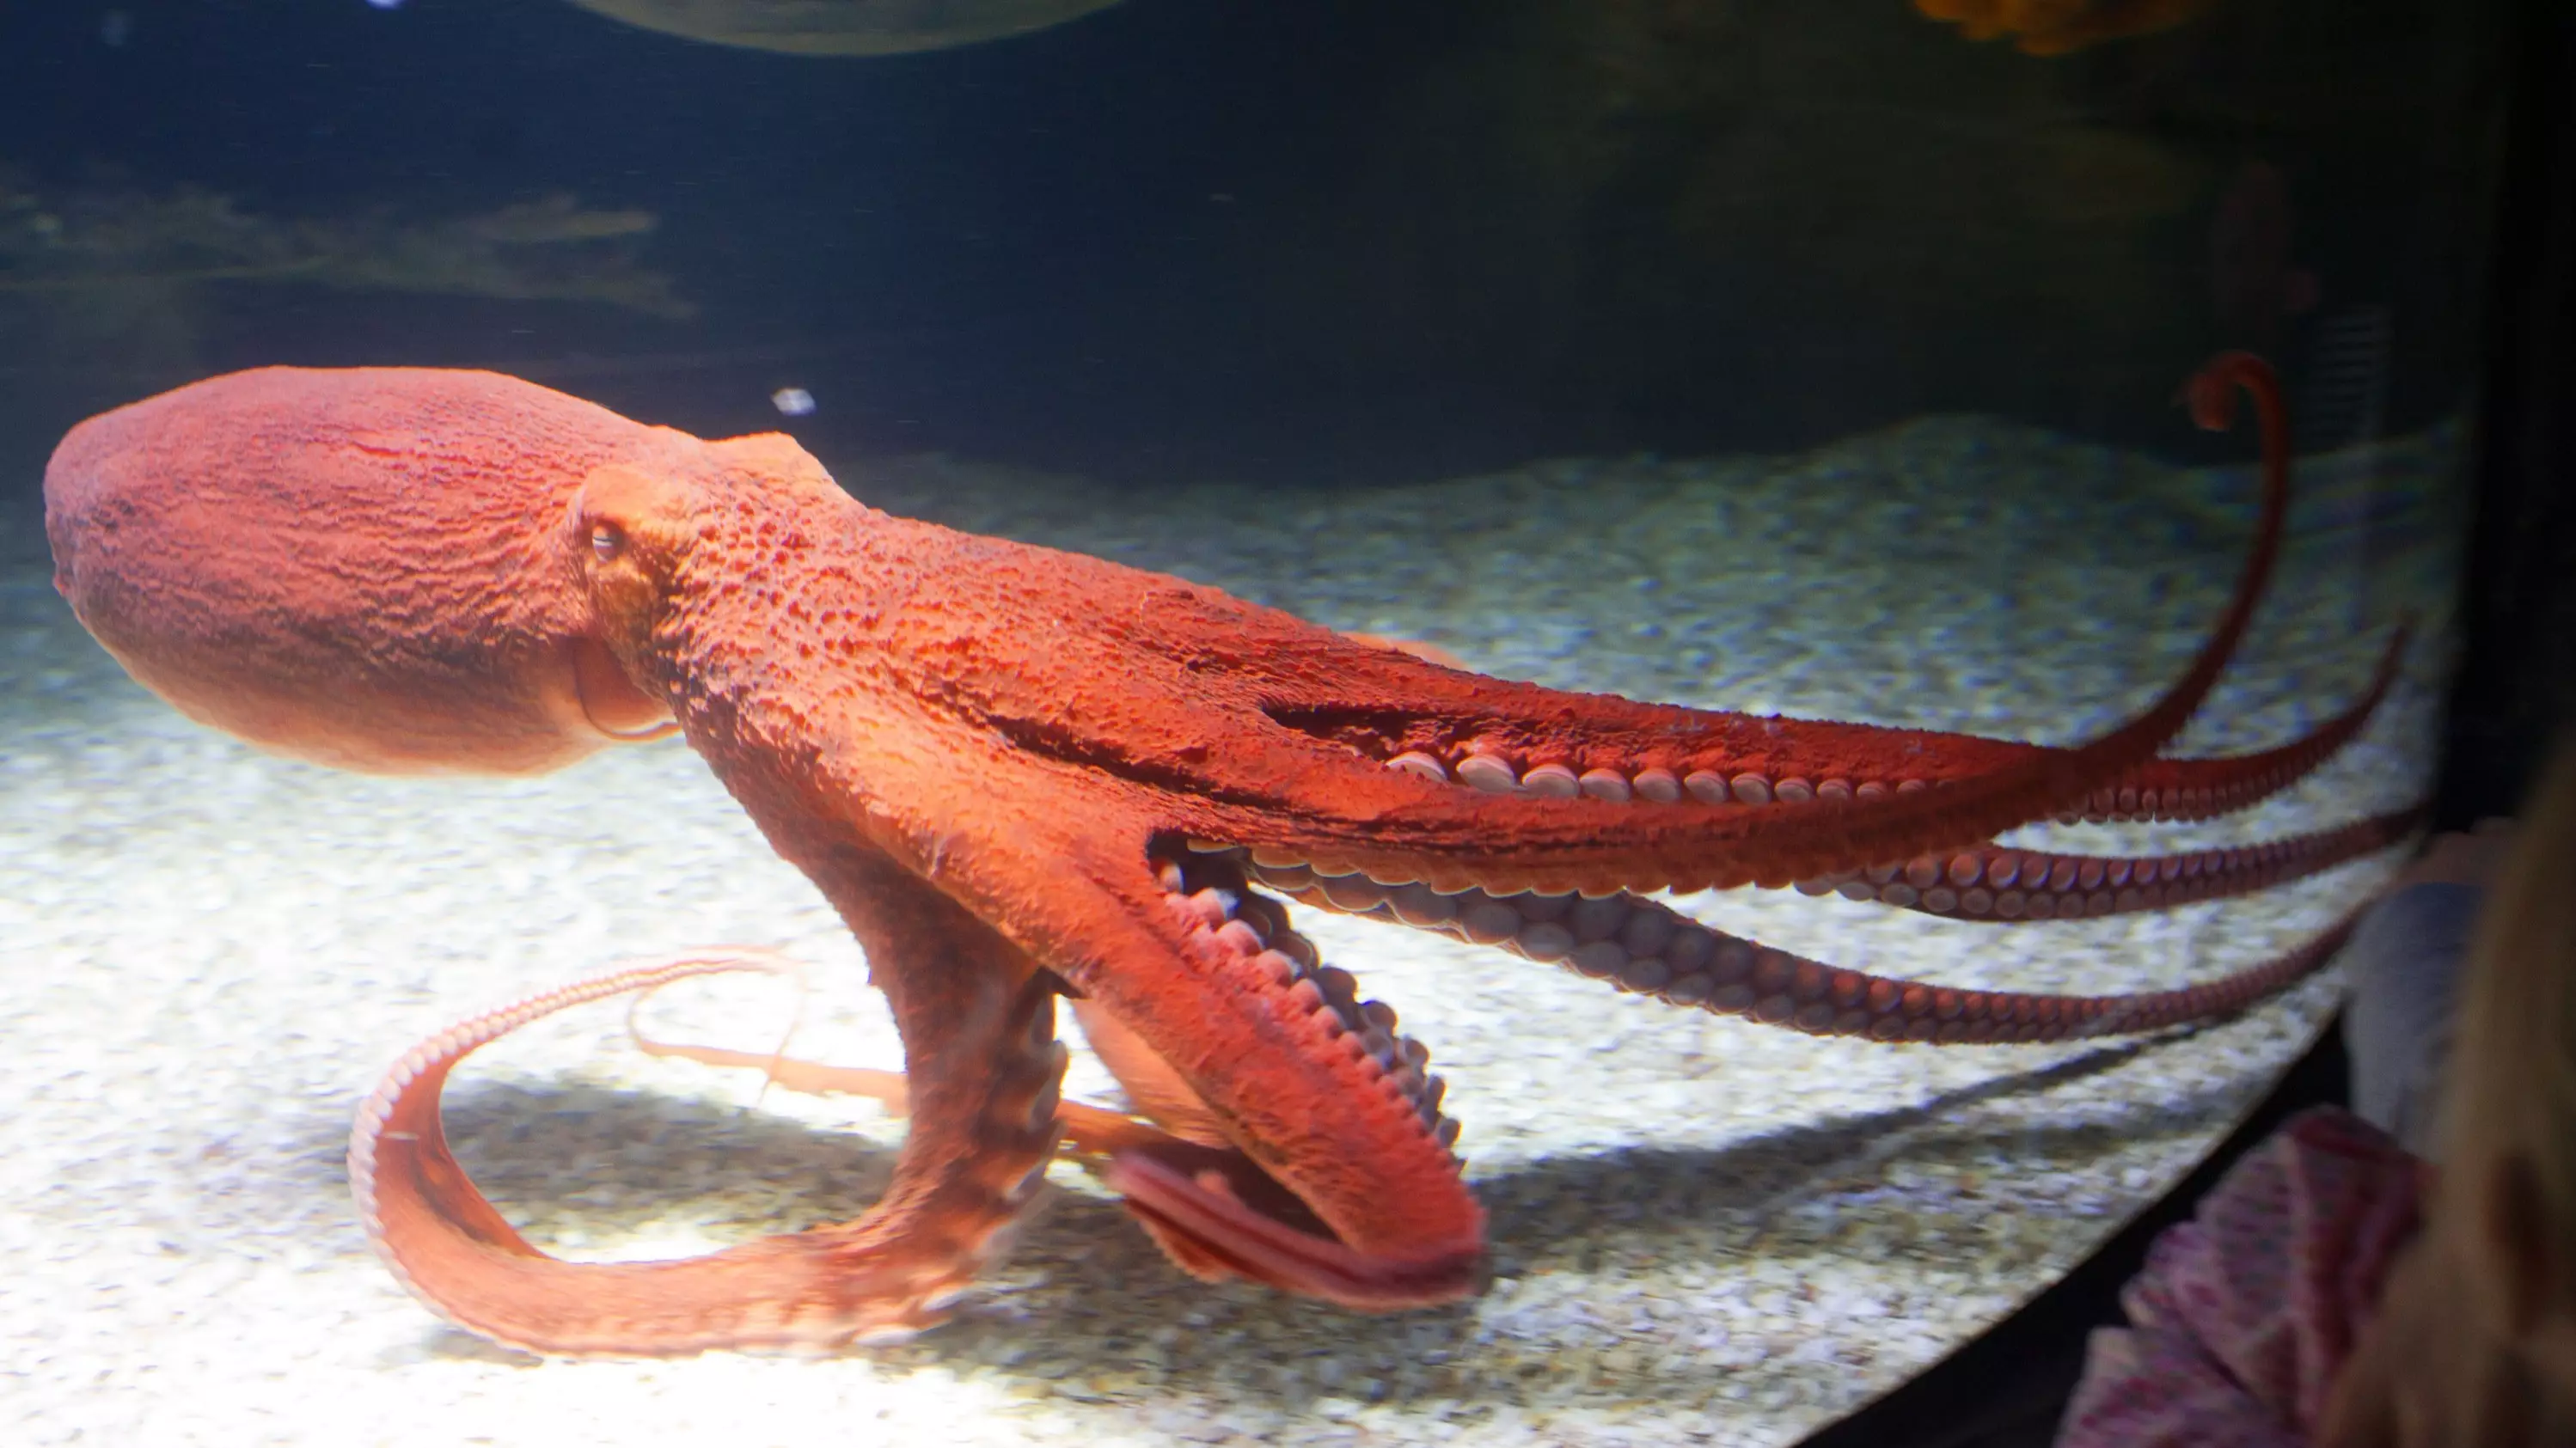 Scientists Find That Octopuses Become 'Very Playful' After Being Given MDMA